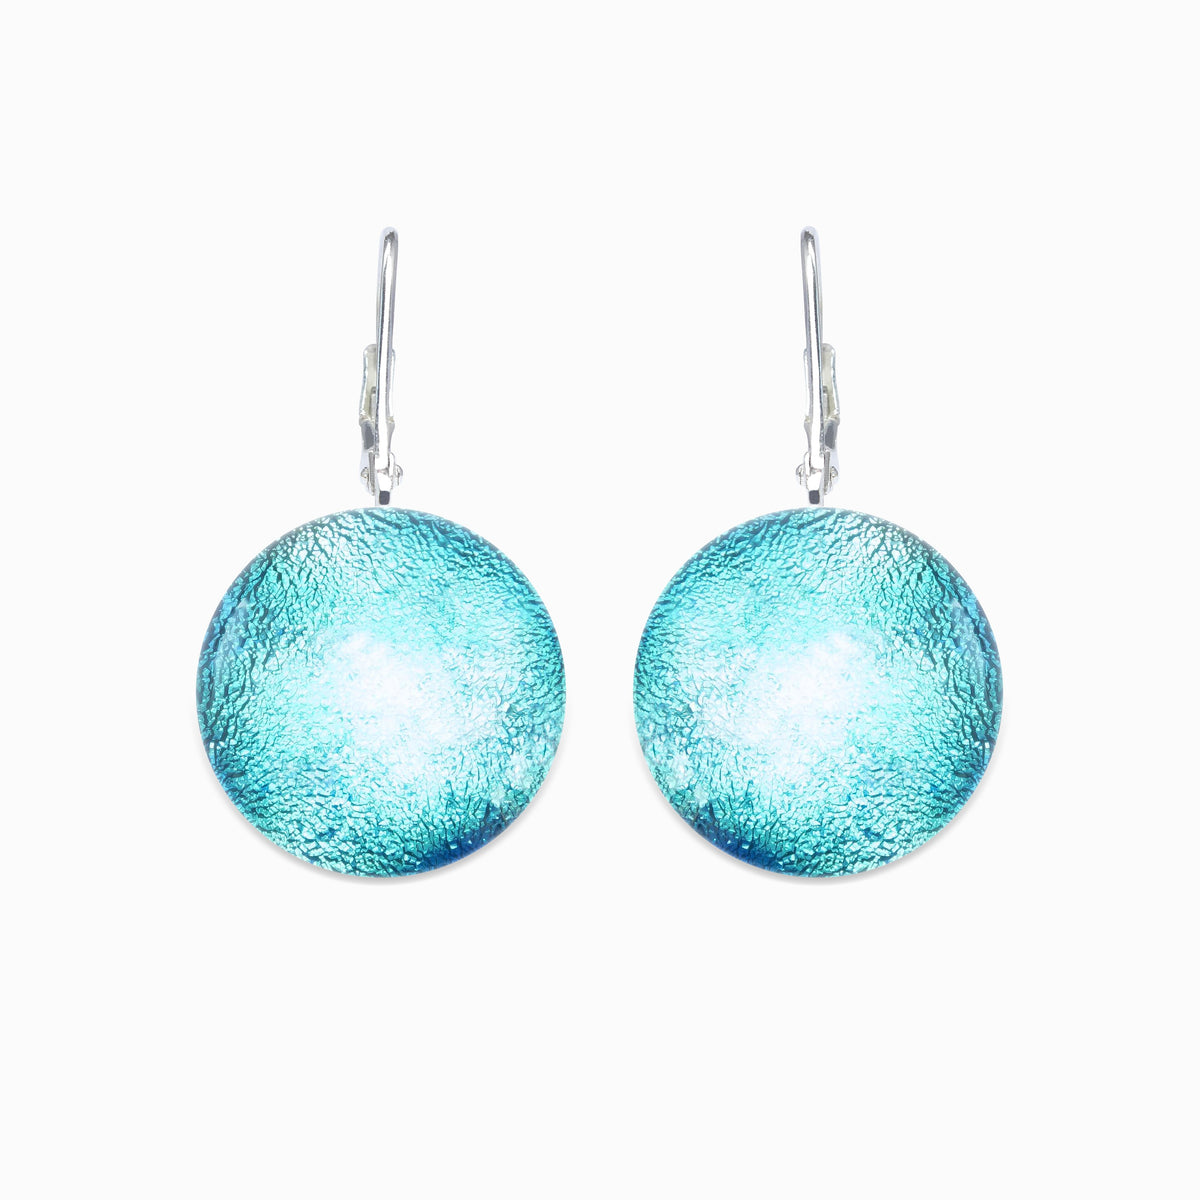 Microcosmoses EARRINGS GLASS REFLET EARRINGS TURQUOISE ~ NIGHT BLUE | ECLIPSE | SILVER 925 | REFLET